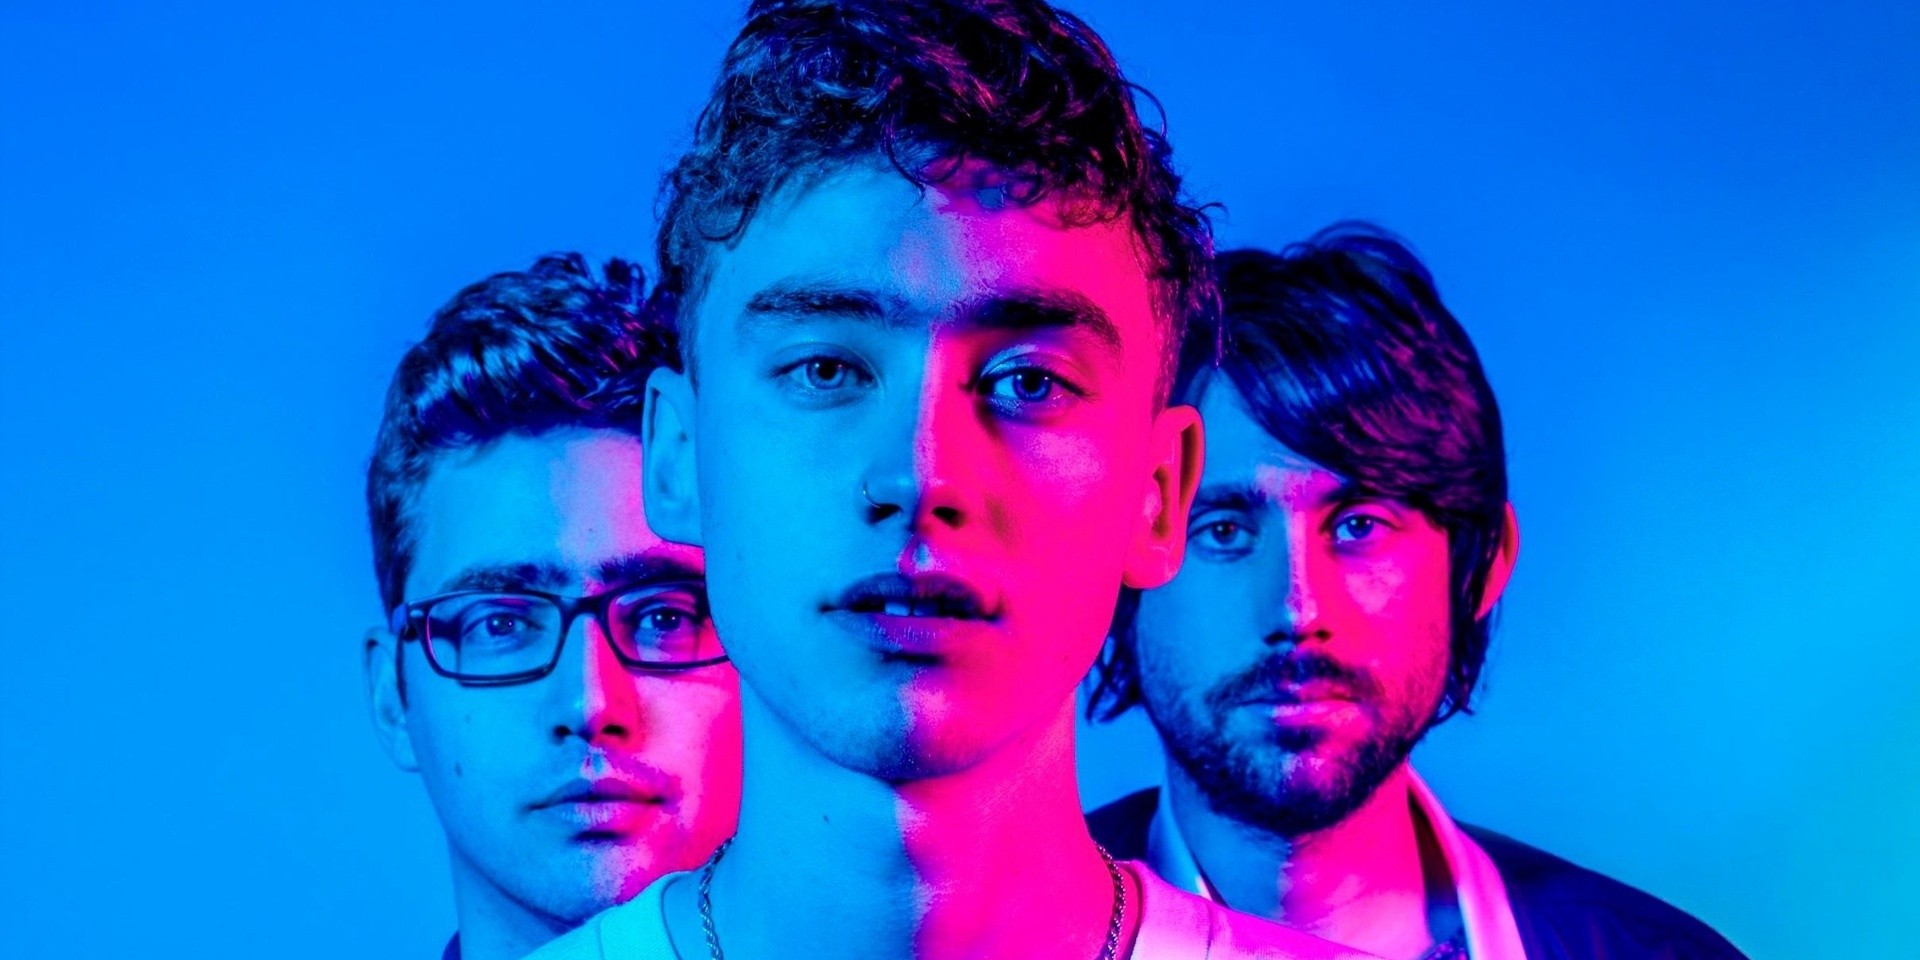 Years & Years announce Asia tour for 2019 – Manila, Singapore, Bangkok and more confirmed